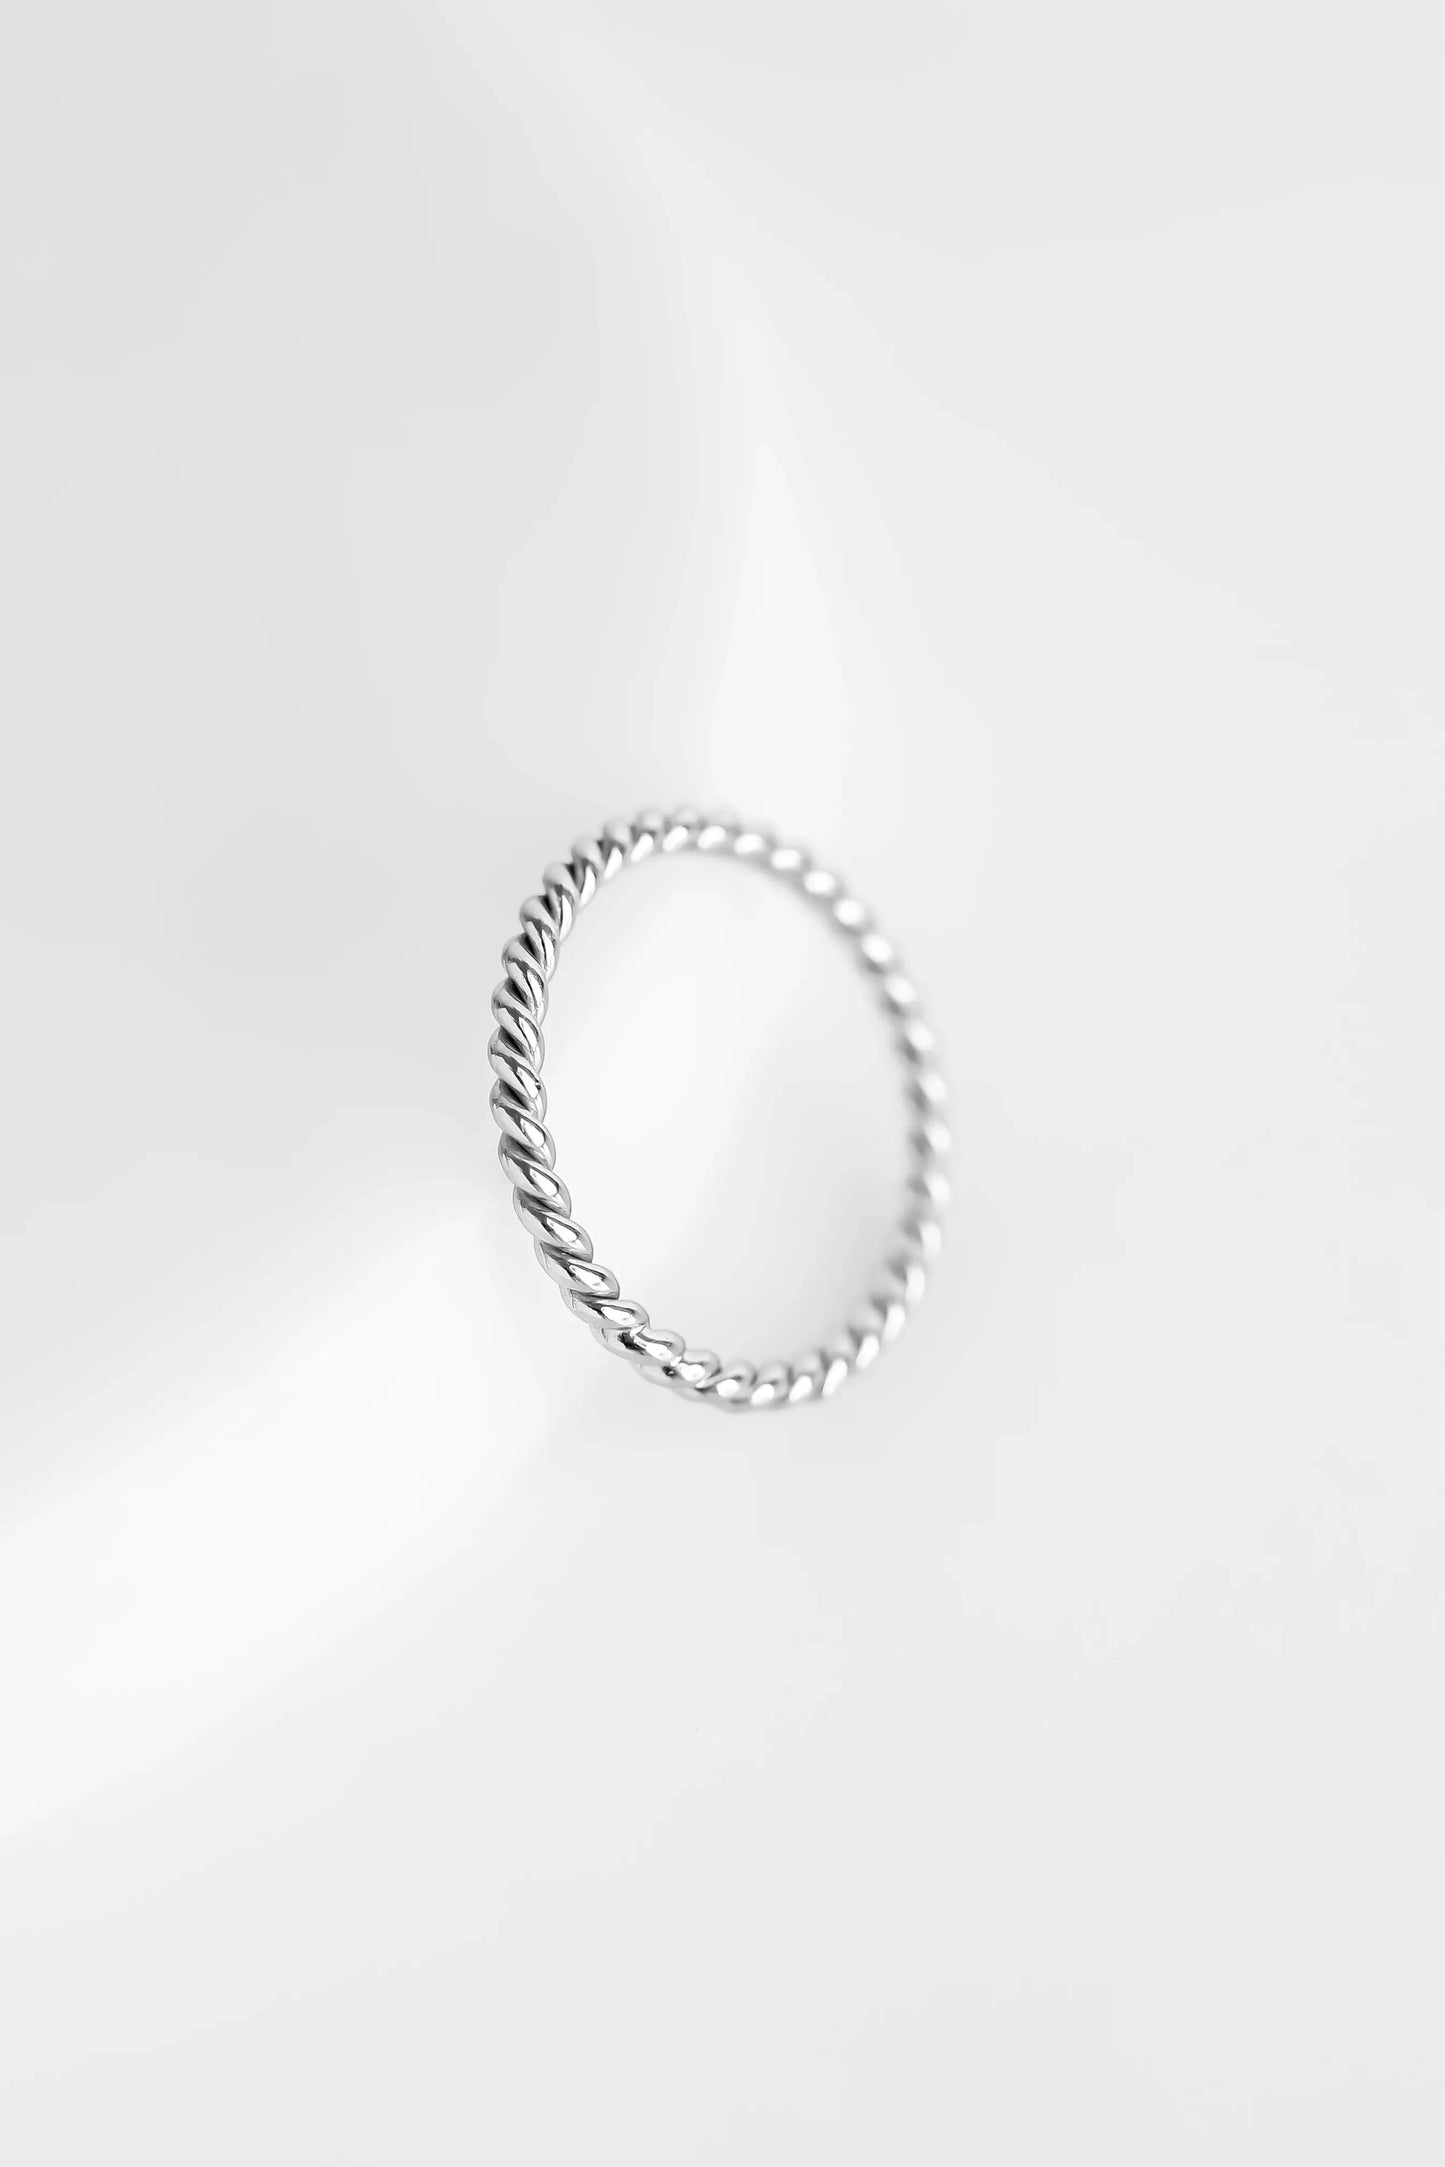 The    Finley Ring by  Francesca Jewellery from the Rings Collection.